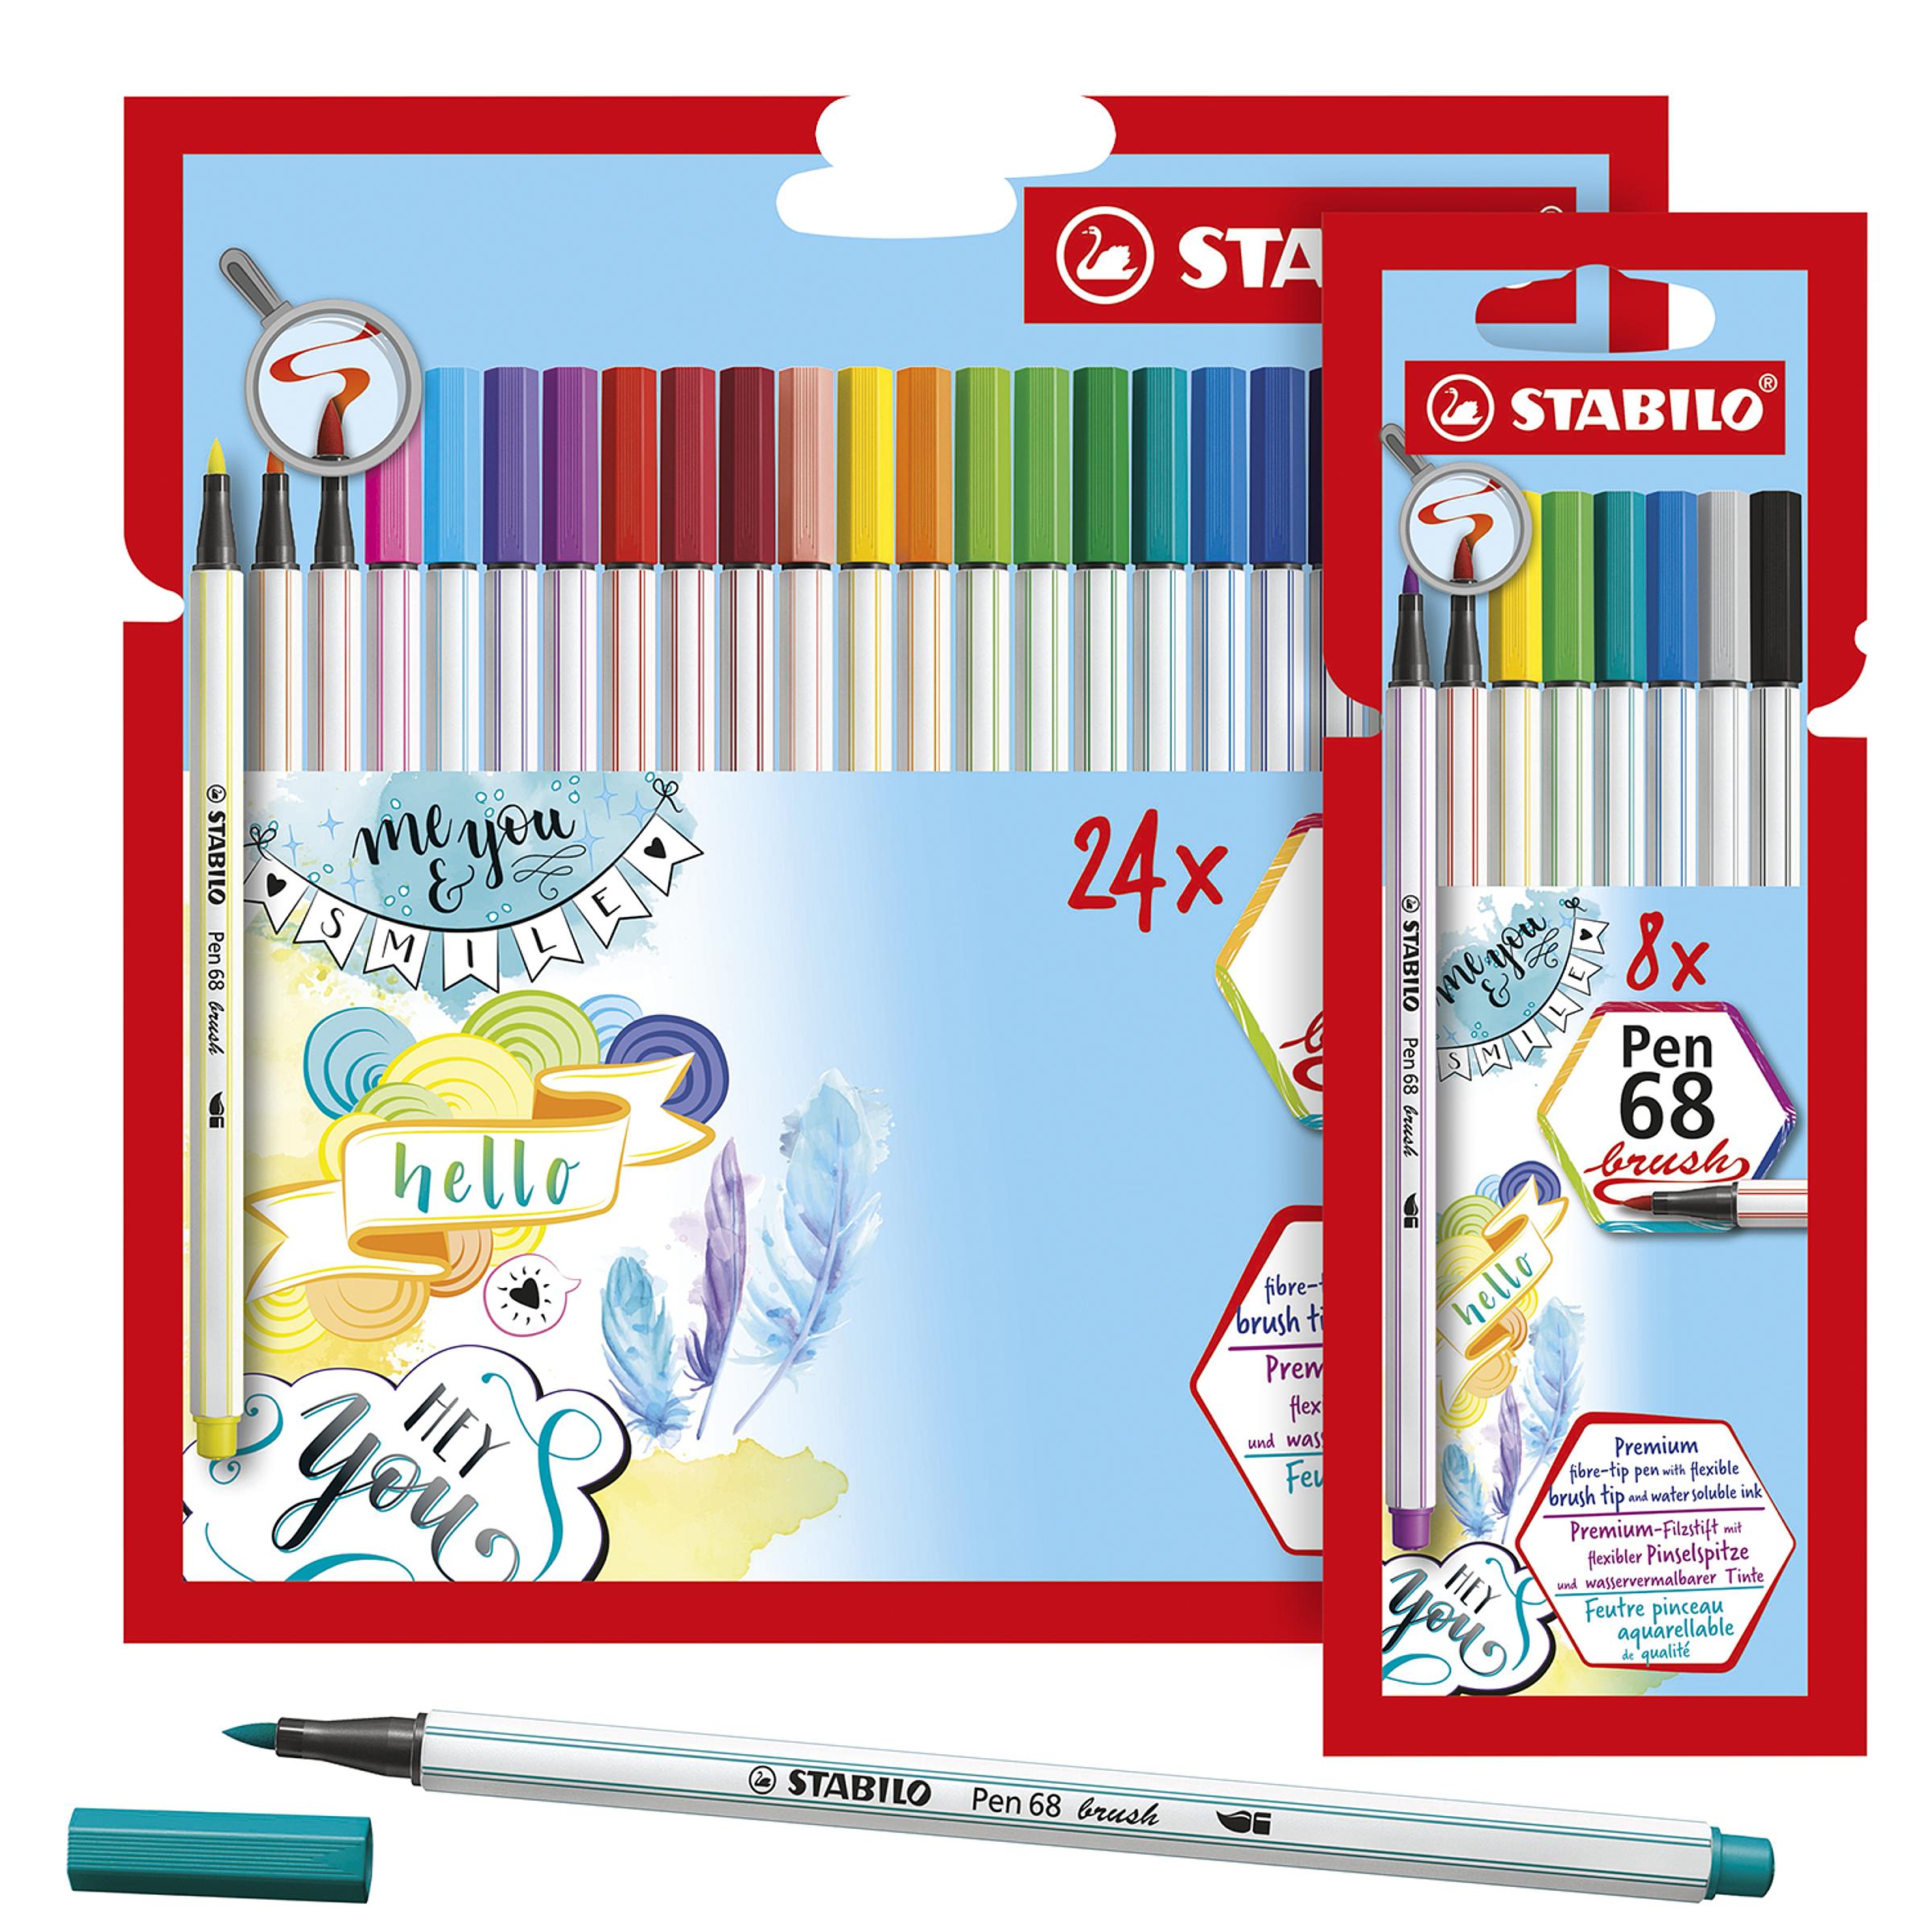 STABILO Pen 68 Brush - 25 Colours Metal Case - Flashcards and